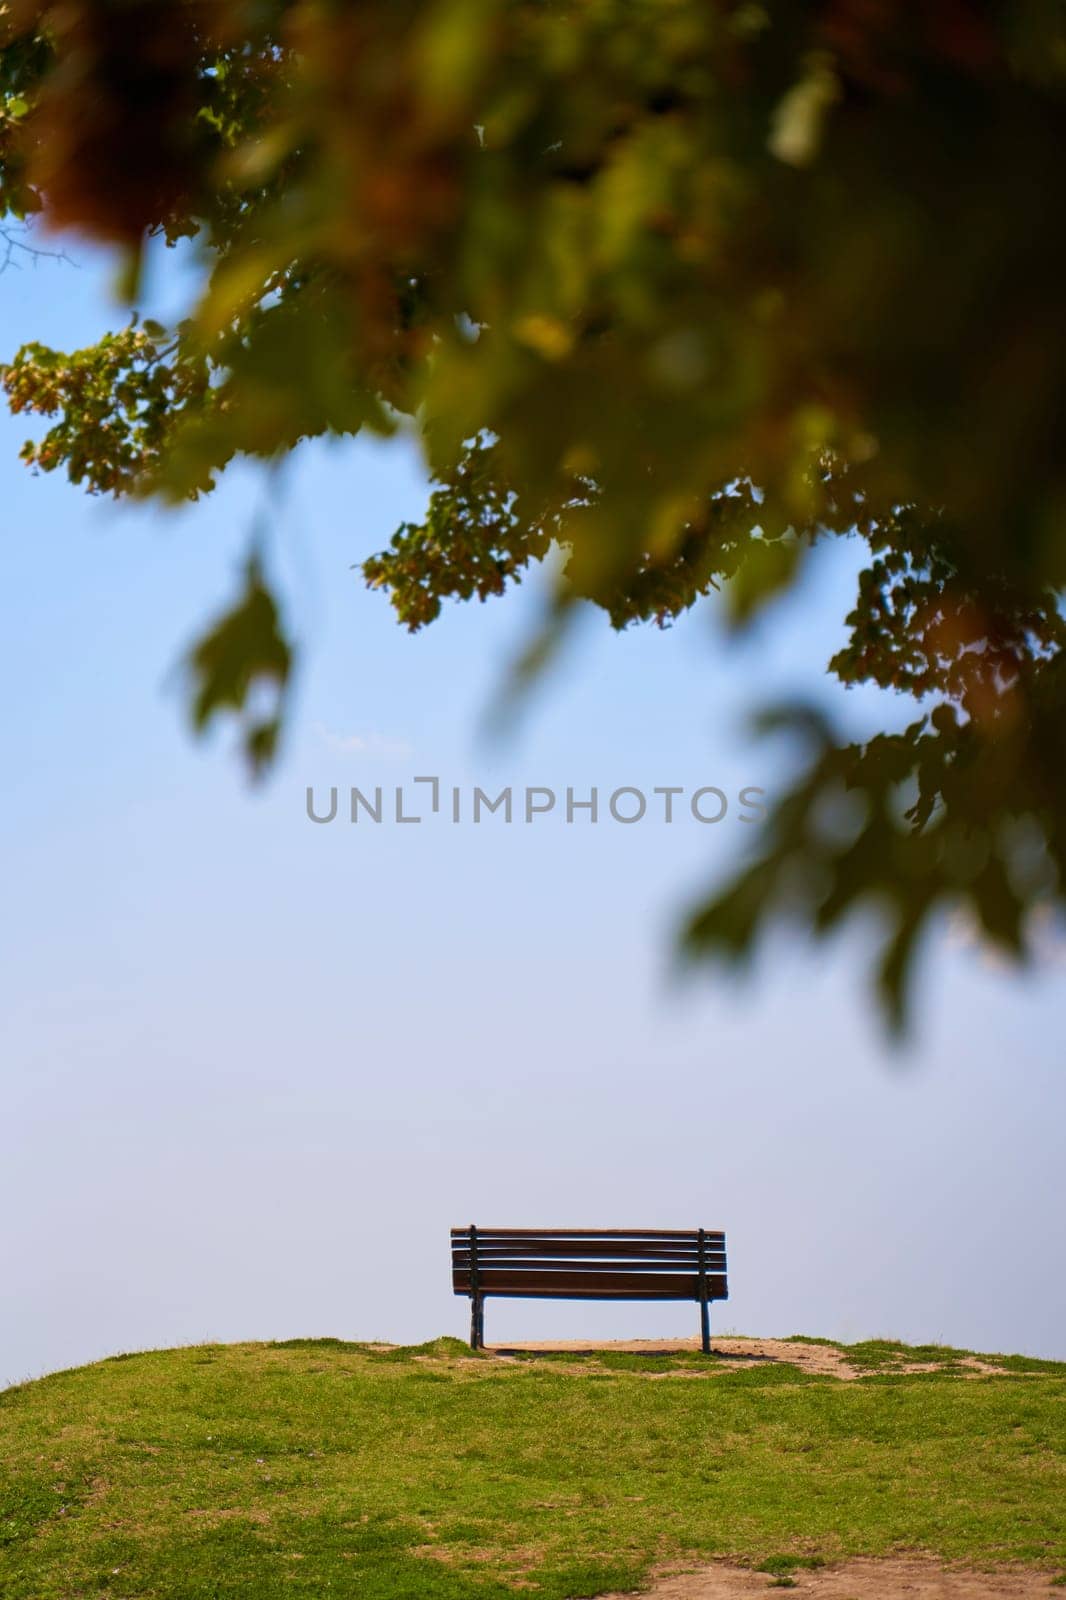 An empty bench on a park lawn against the sky.